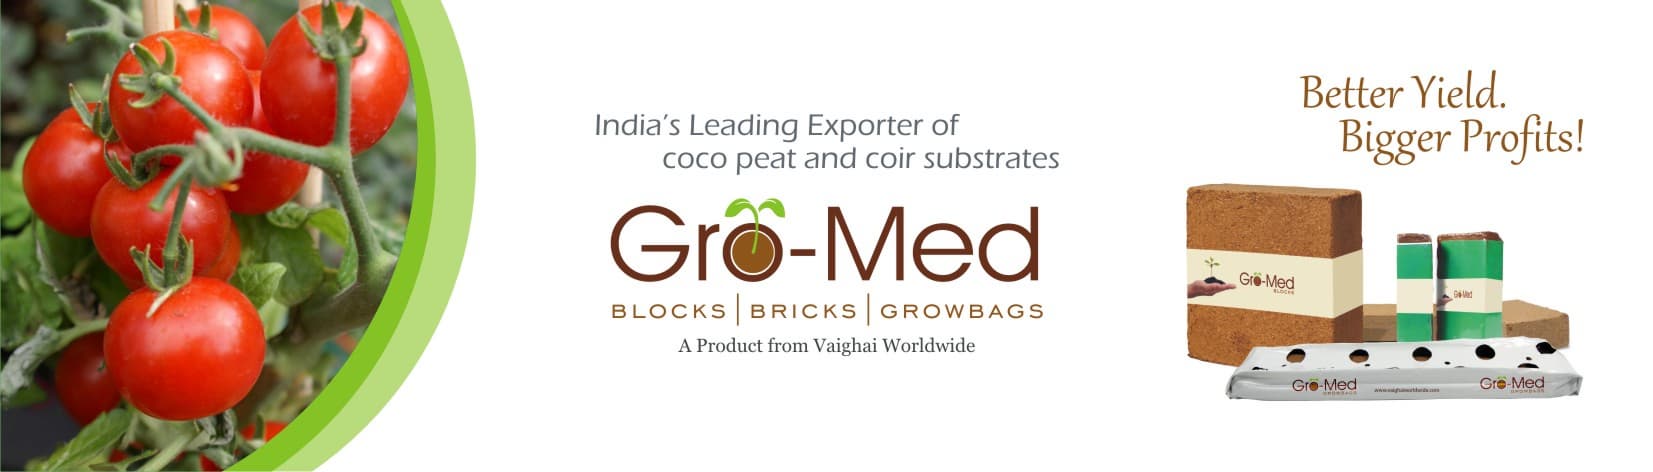 Gro-Med Coco Peat